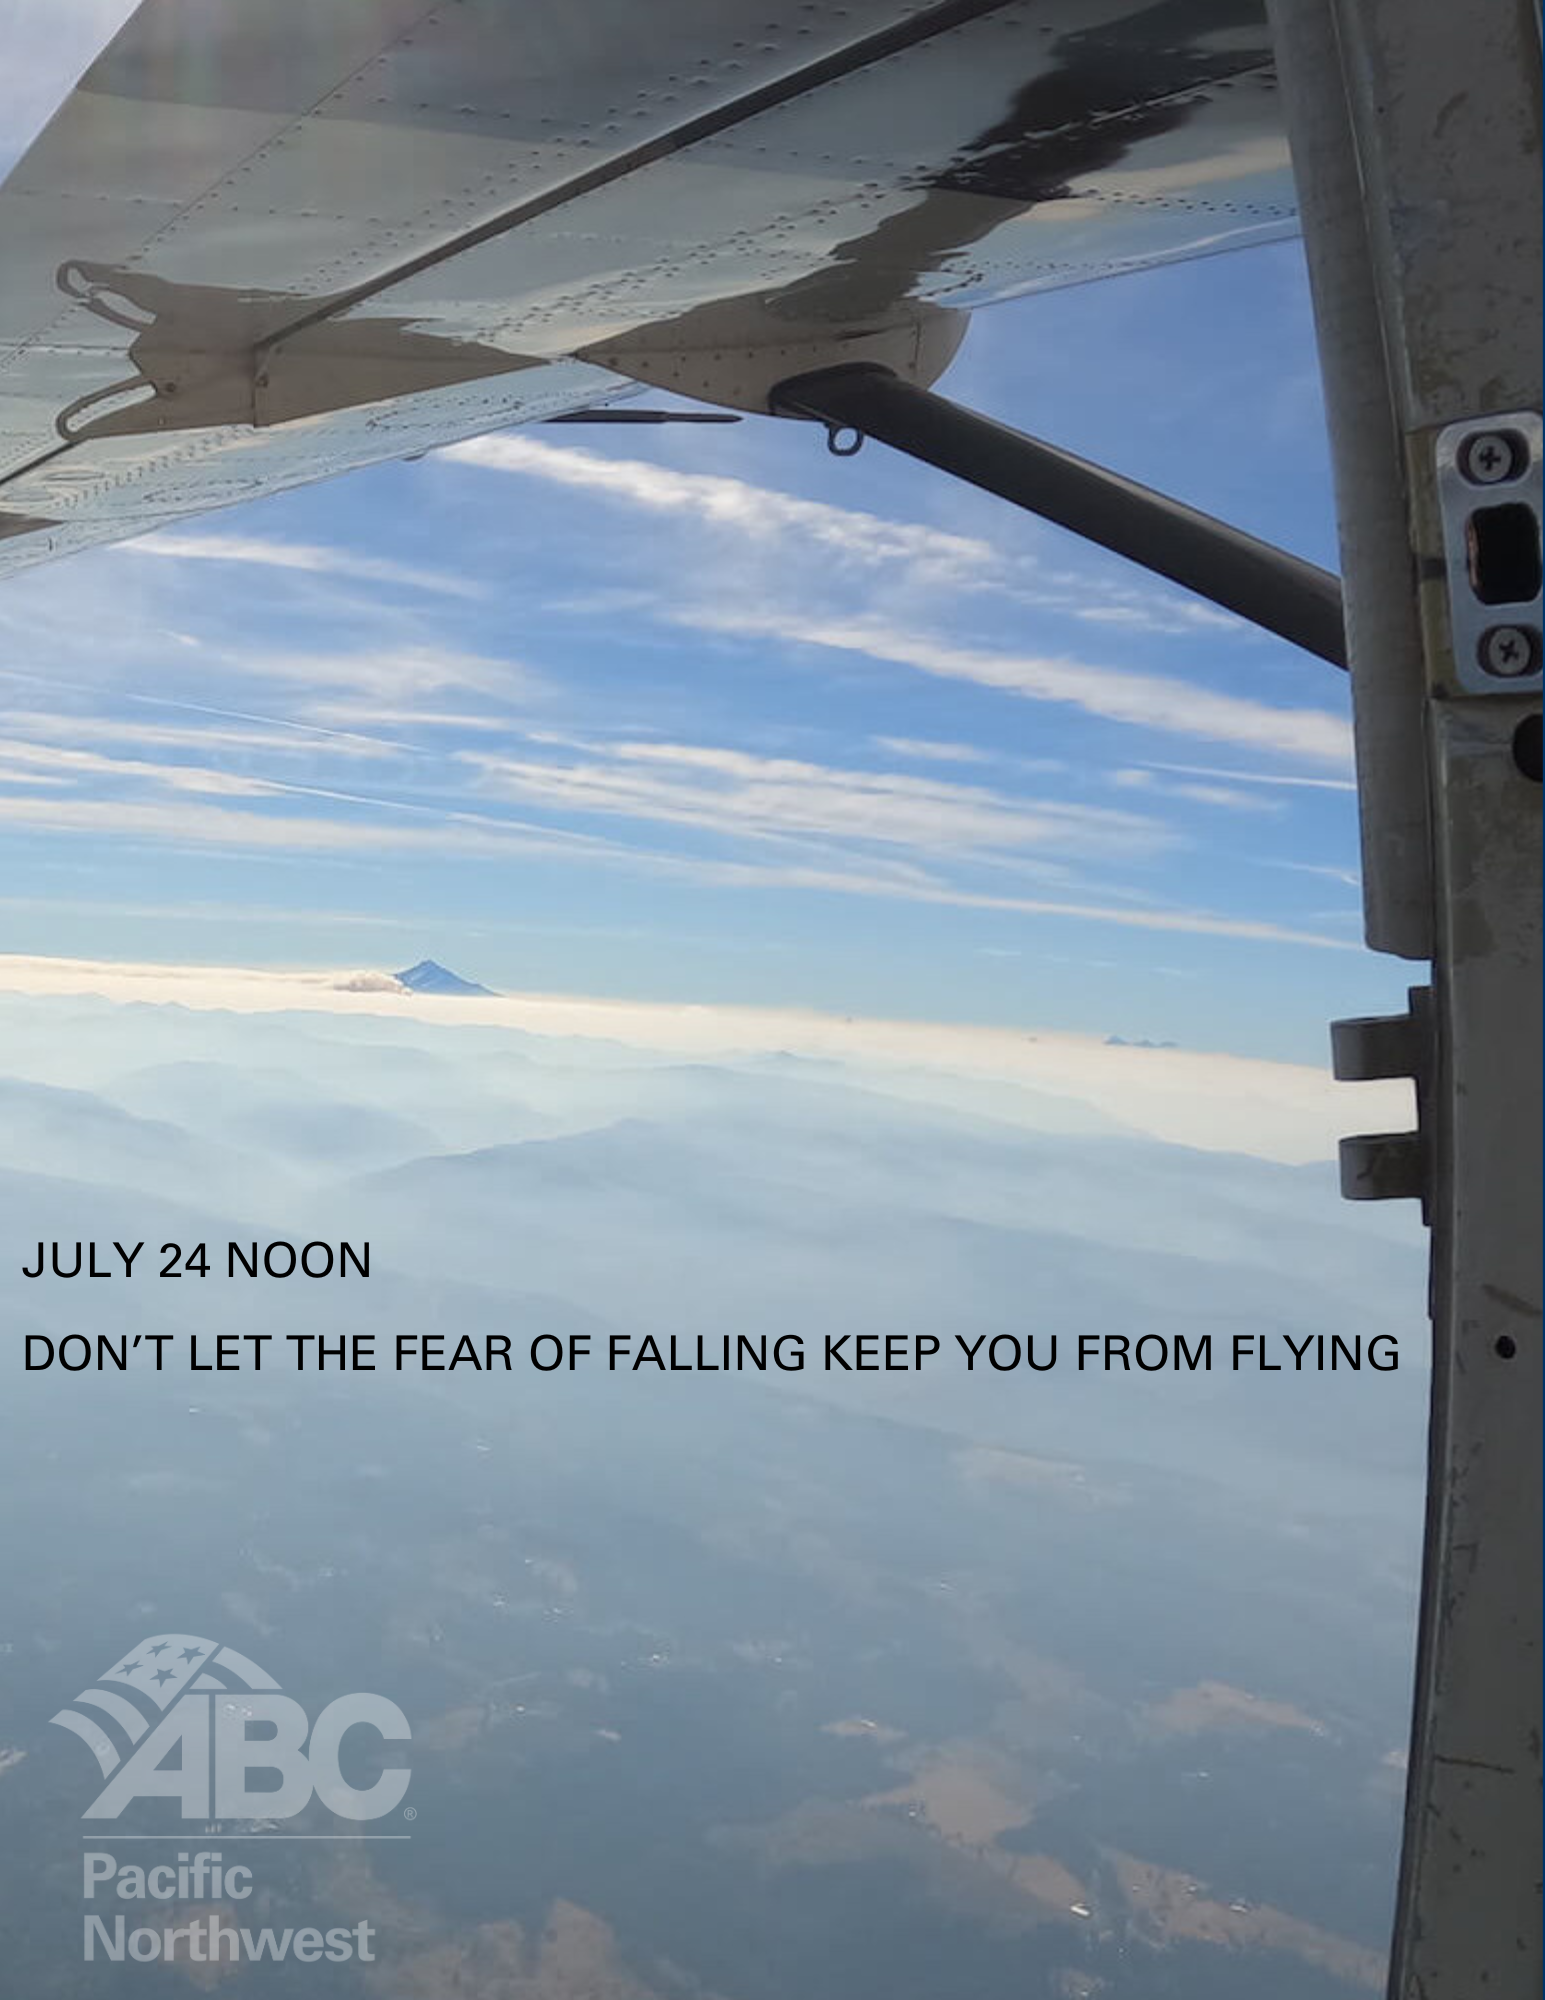 ABC PNW Skydiving July 24